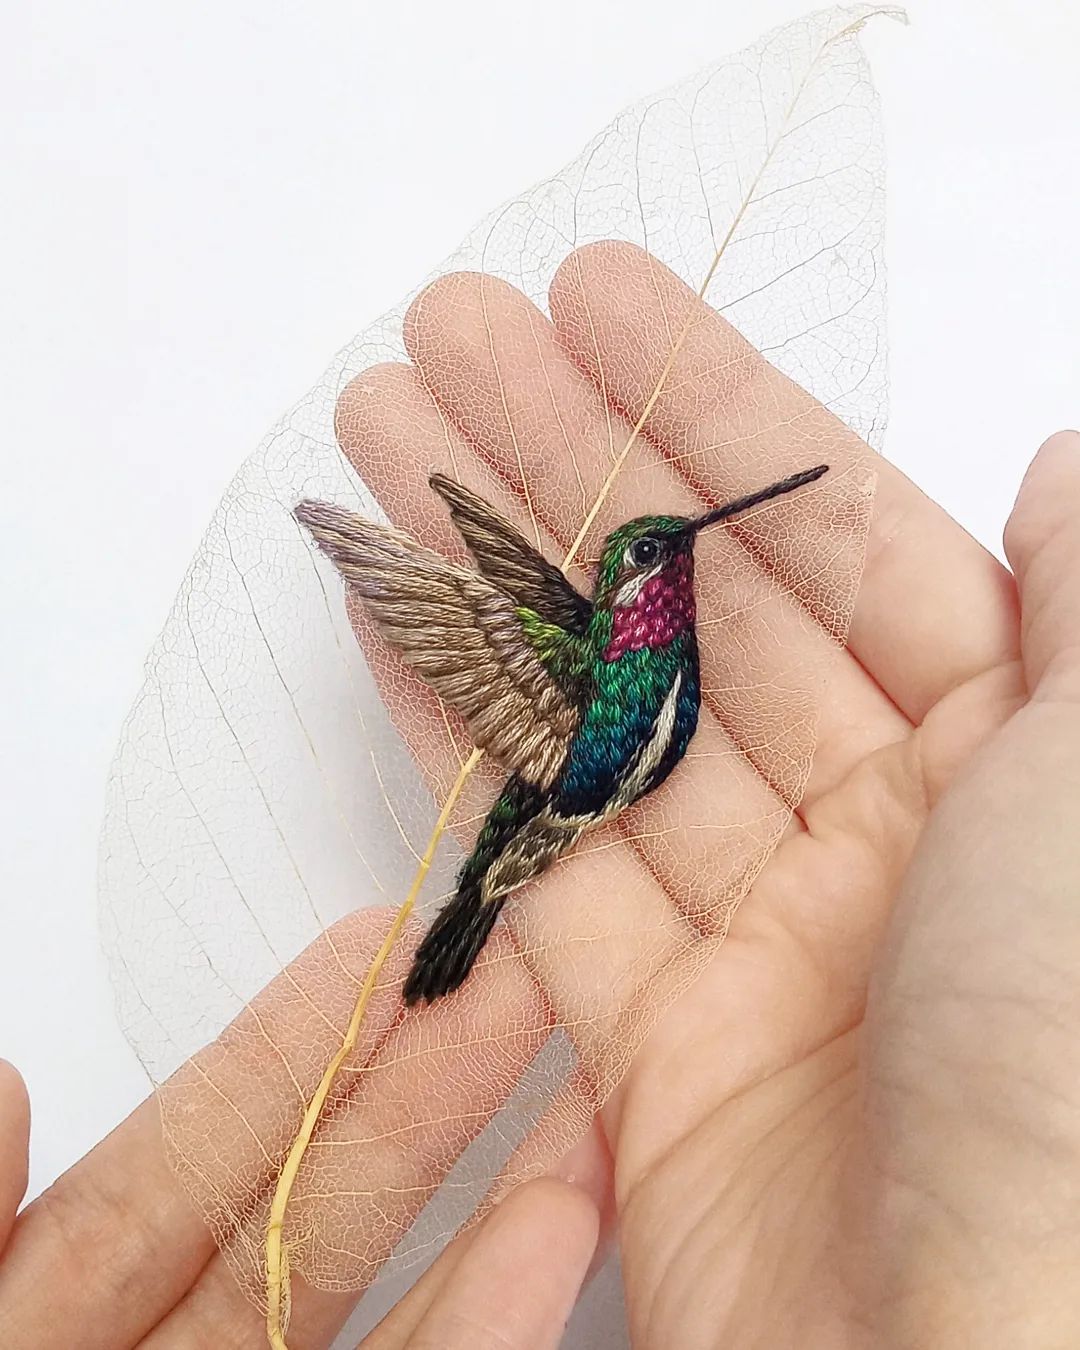 Gorgeous Figures Embroidered On Leaves By Laura Dalla Vecchia 21